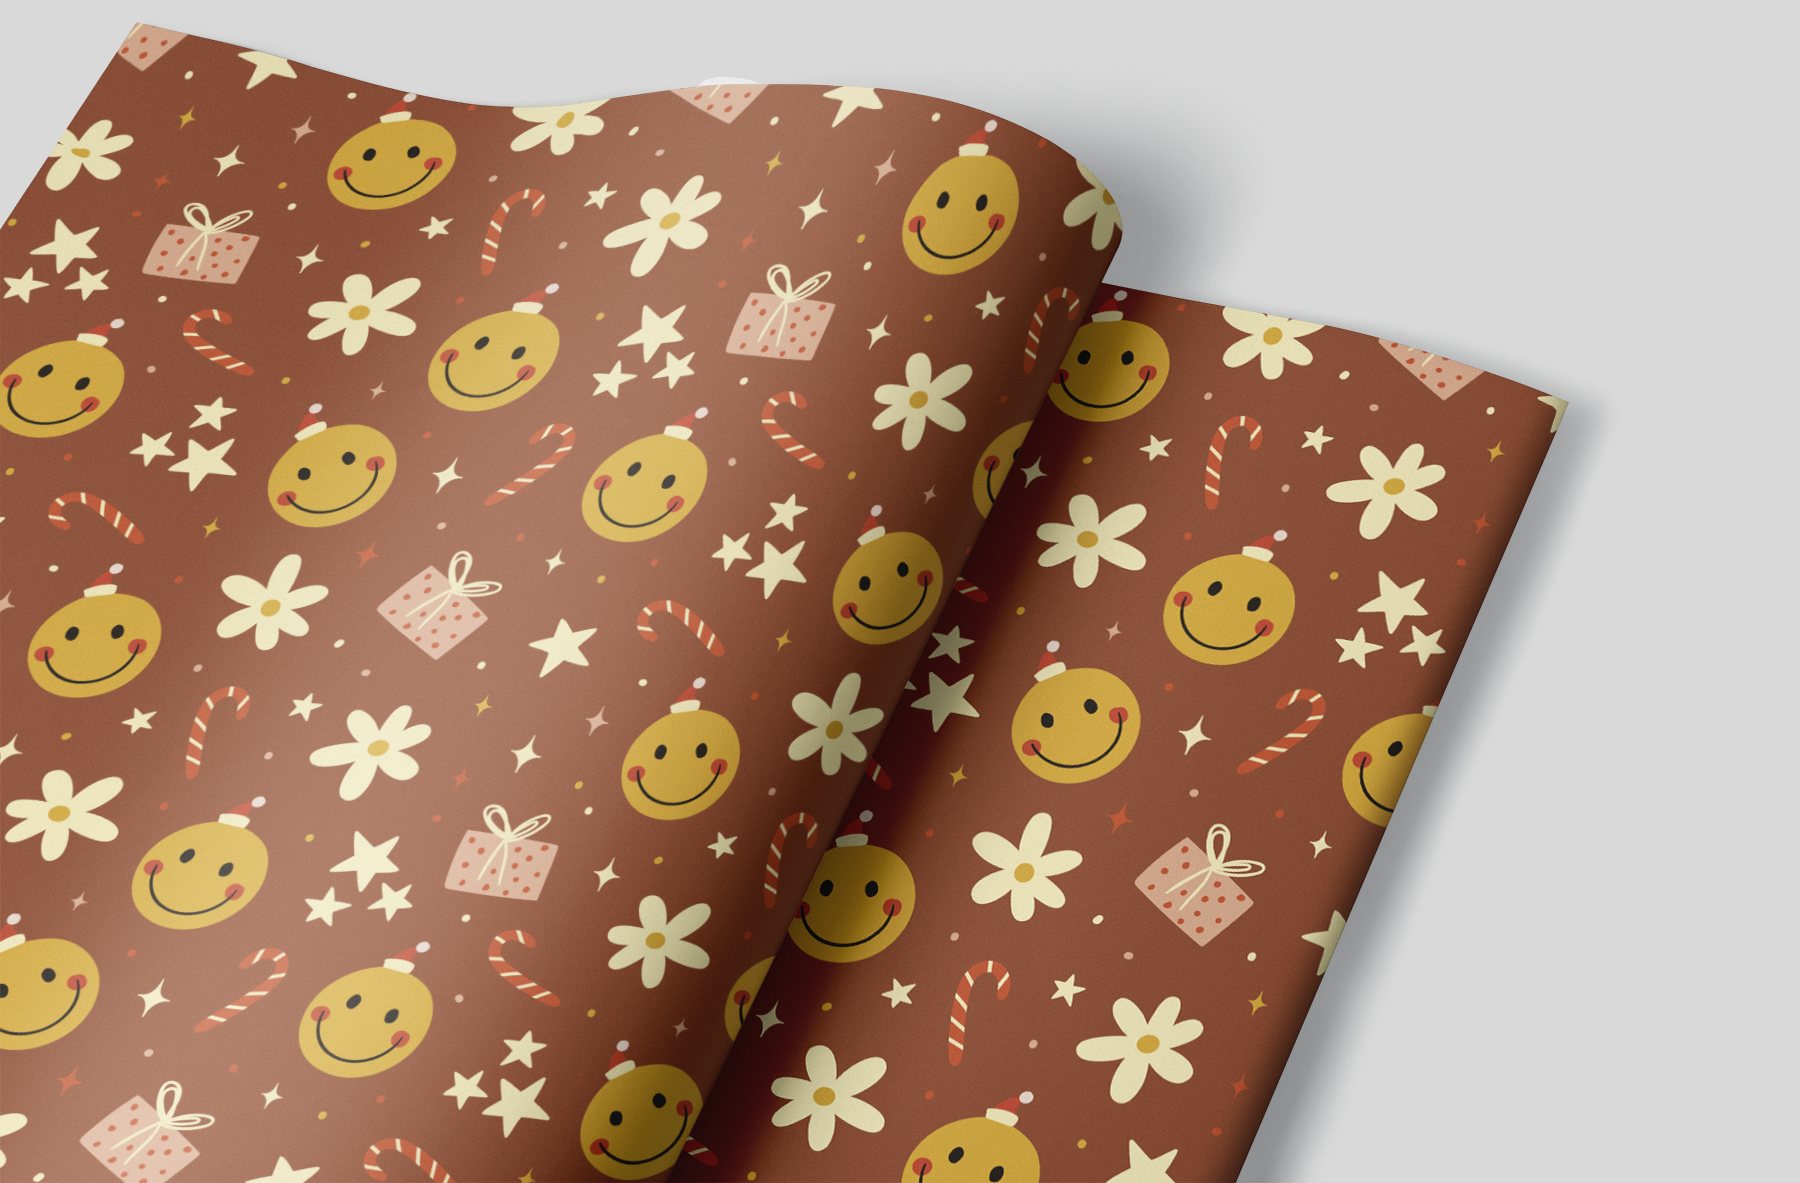  VILLCASE 15 Sheets Christmas Wrapping Paper Flower